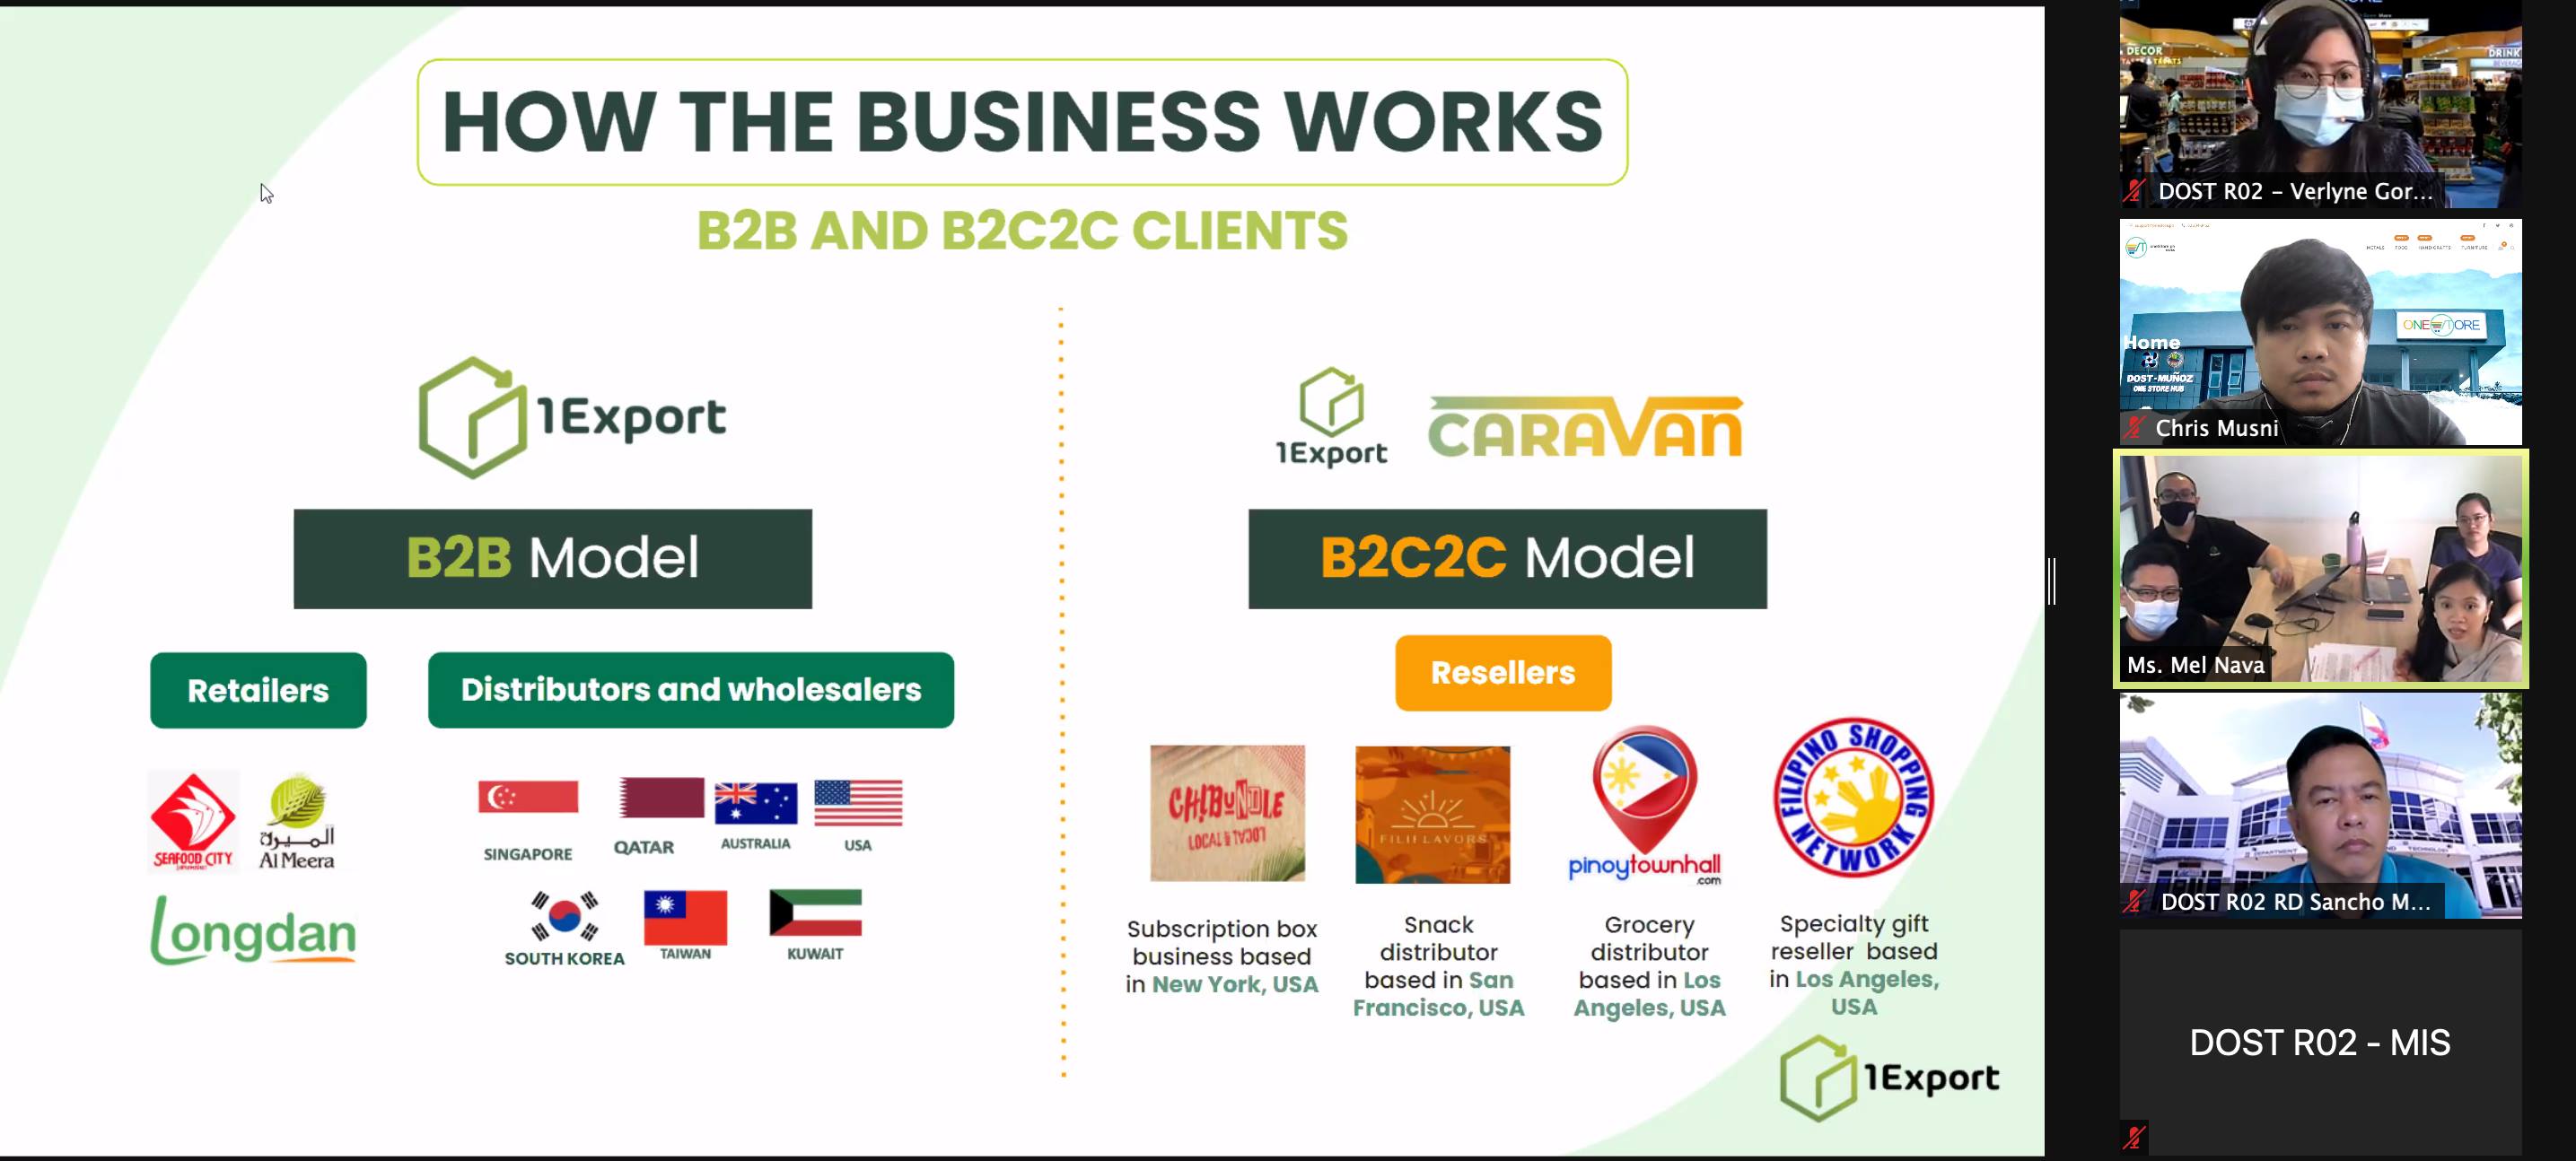 The 1Export Business Models